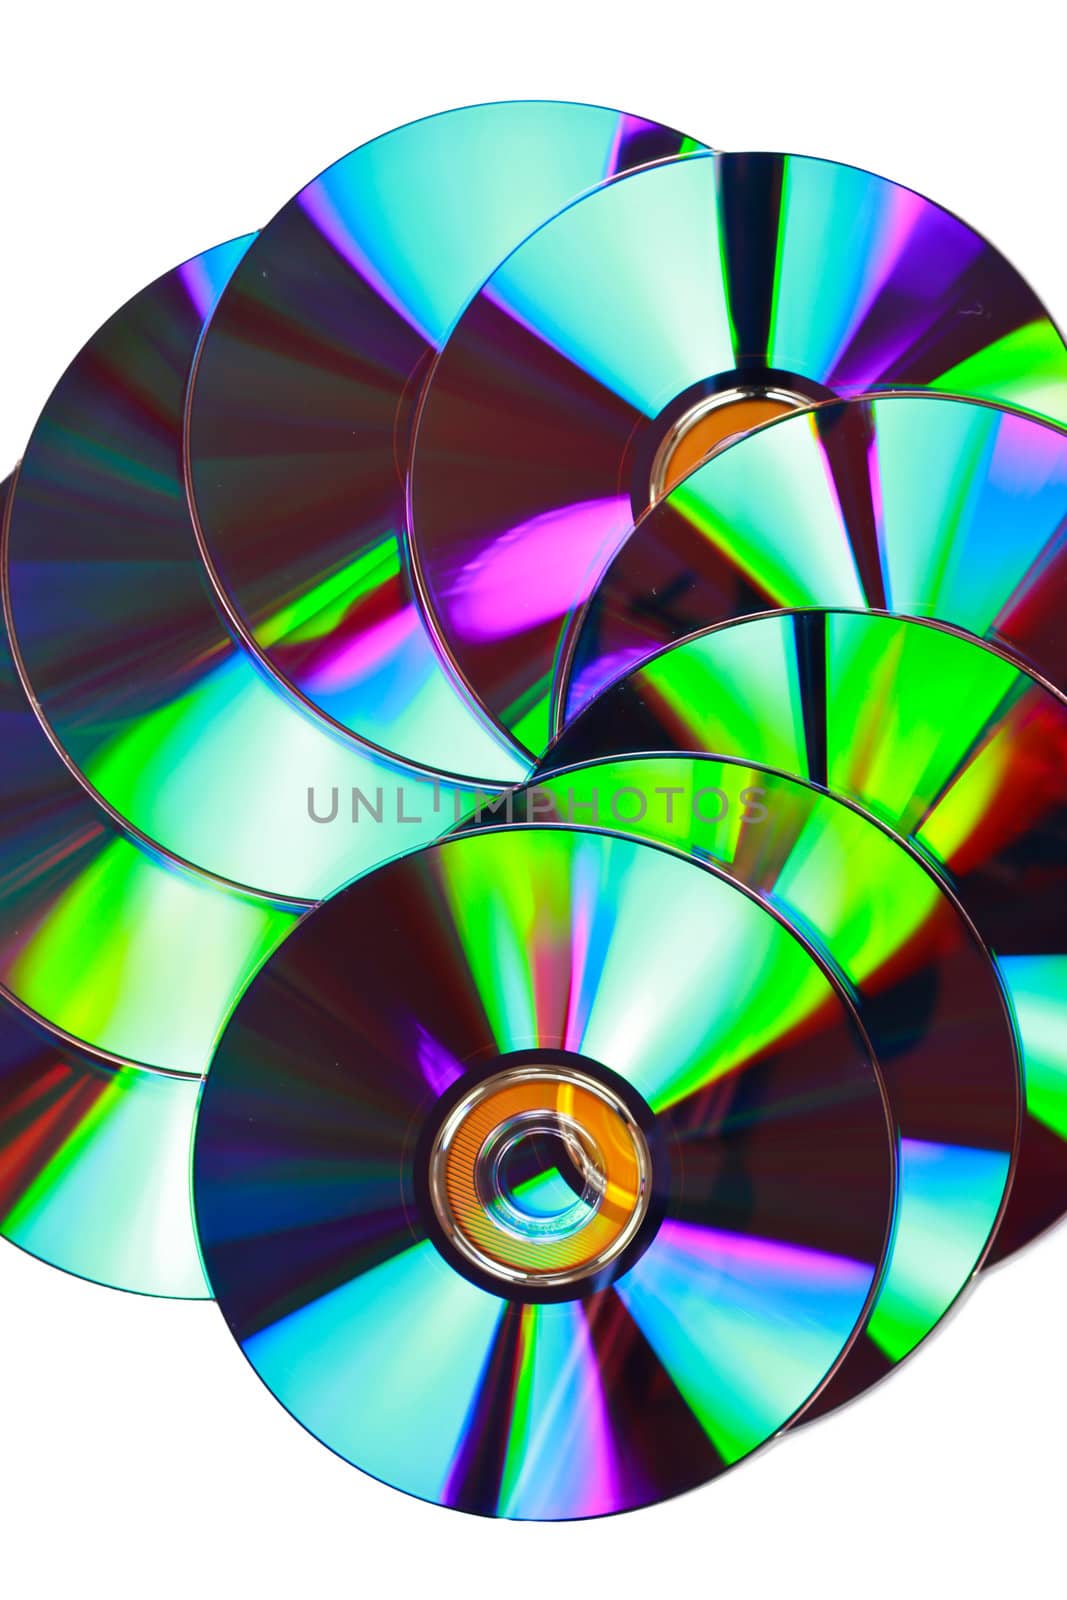 close up CD texture in white background by bajita111122